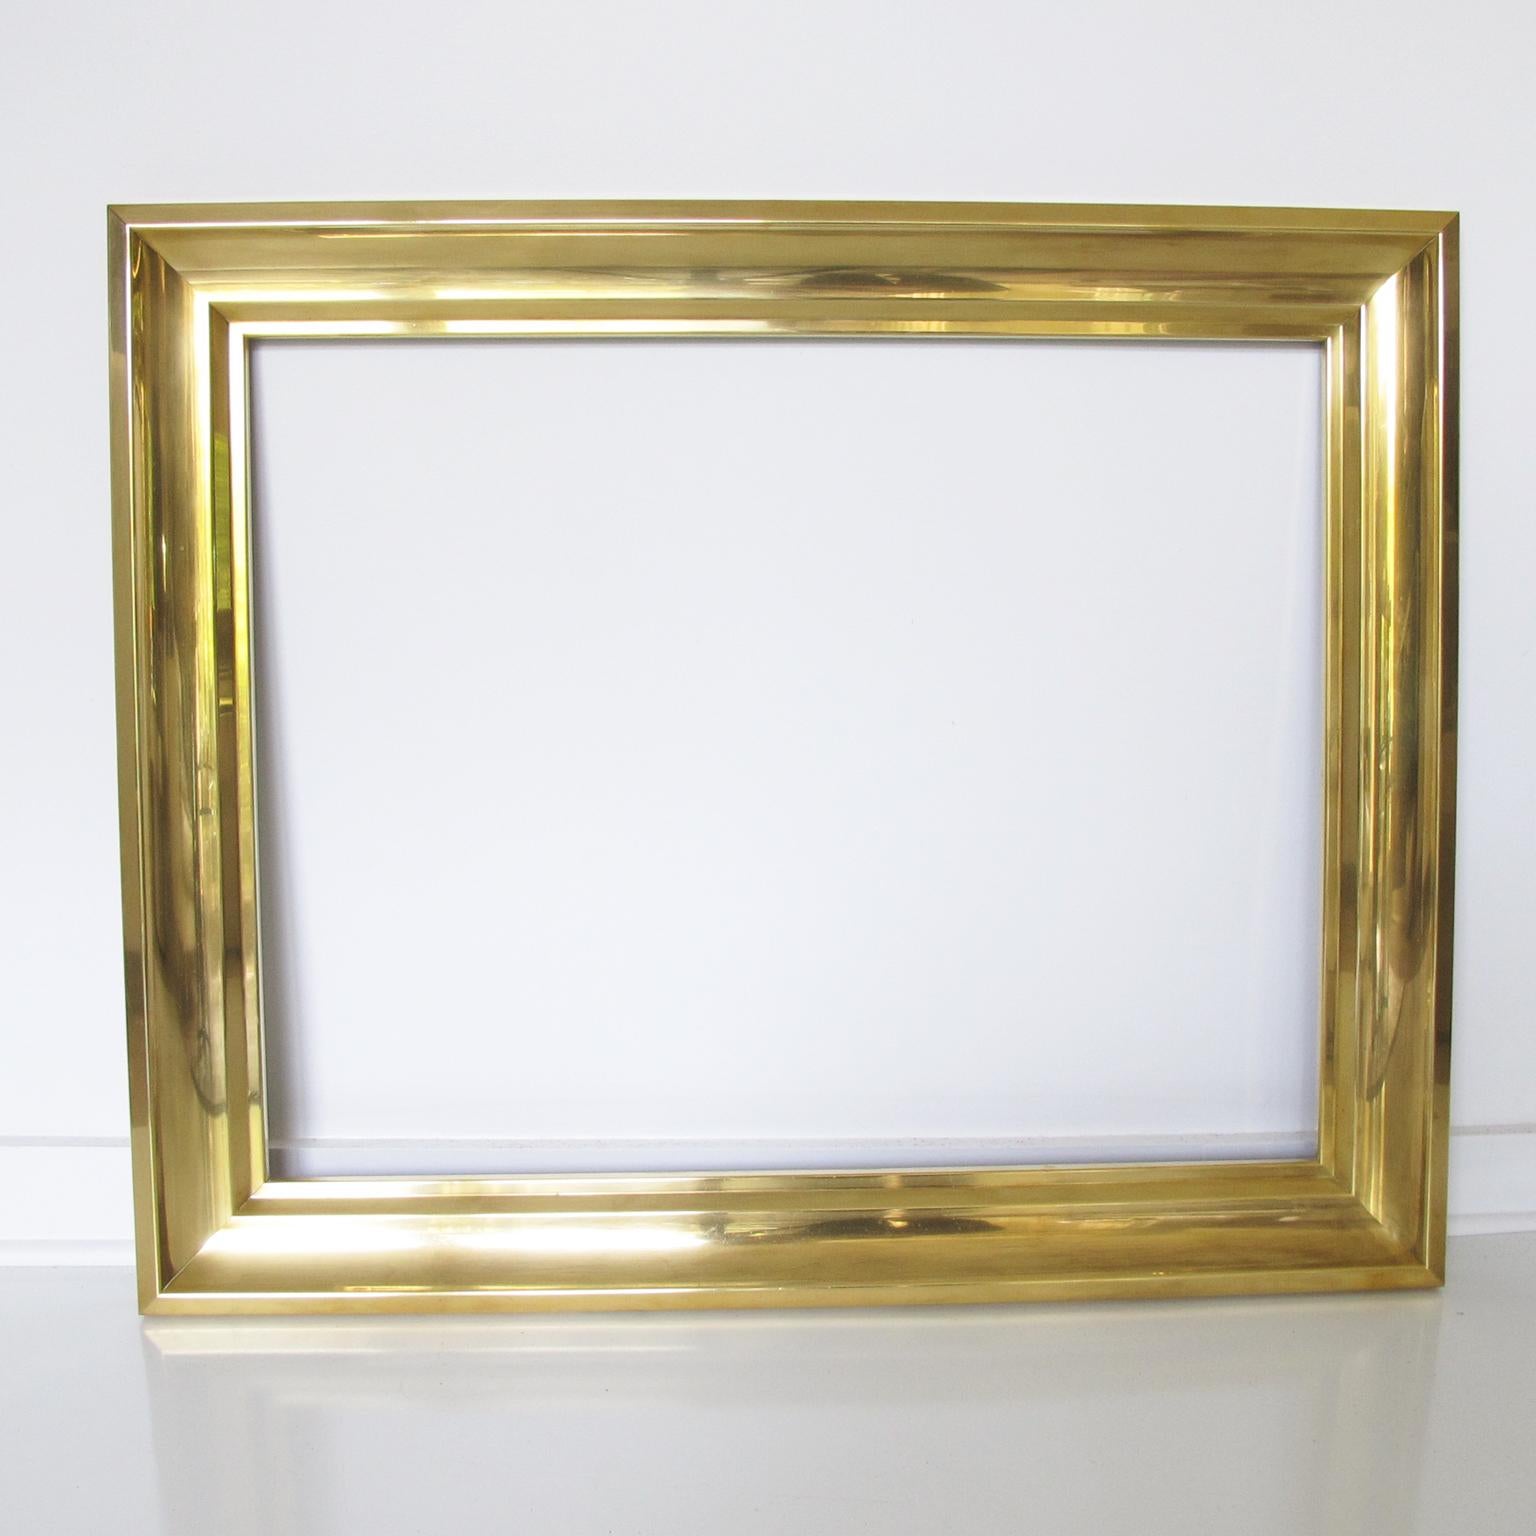 This lovely 1940s French polished brass frame is perfect for paintings, drawings, lithographs, mirrors, or any creative decoration. The frame has a large proportion and can be hung in a portrait or landscape position. The gilded brass frame has a